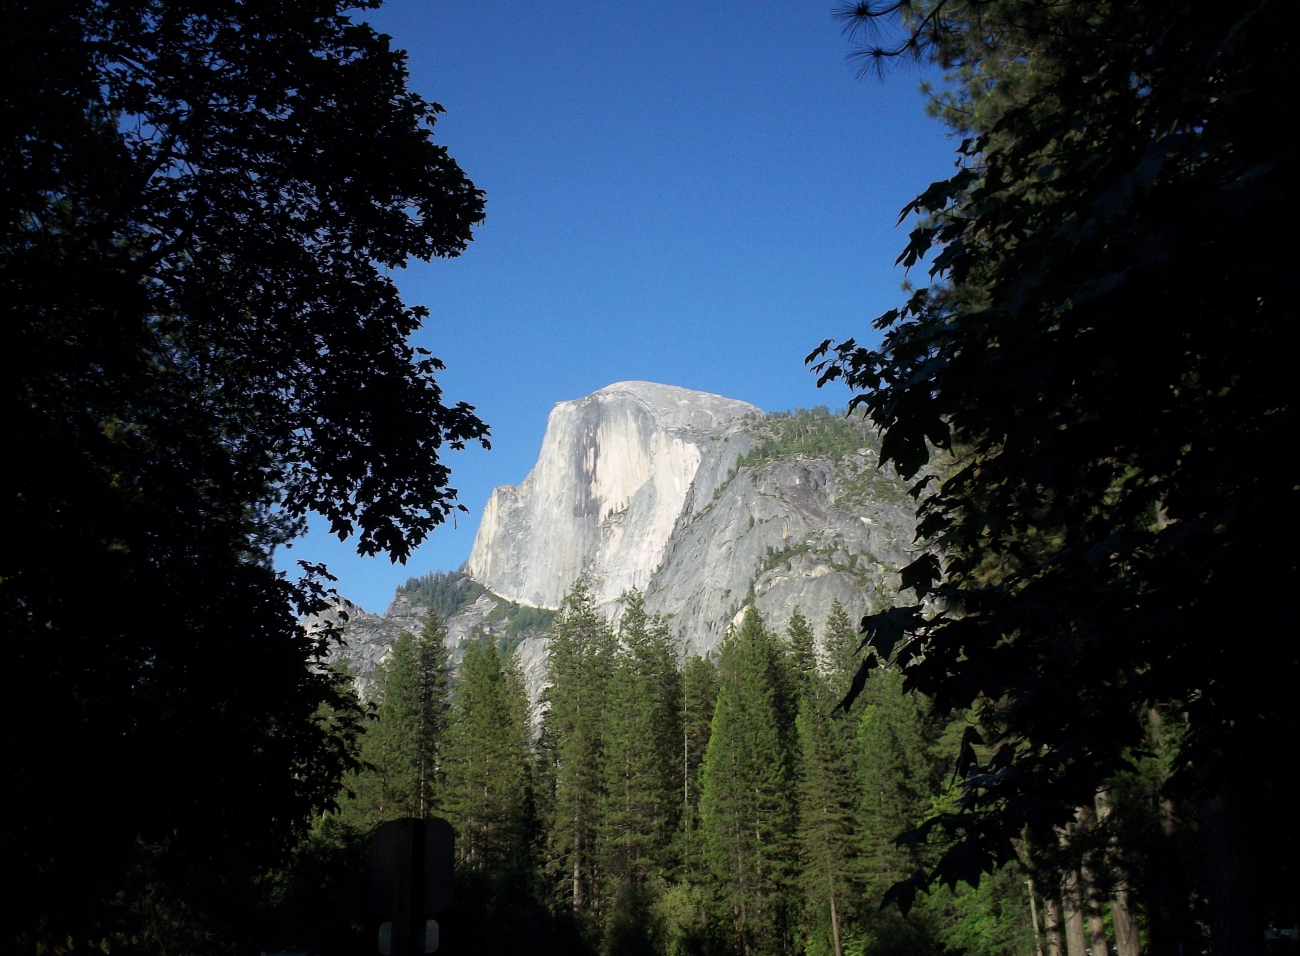 The iconic Half Dome is seen through the trees on the valley floor ofYosemite Valley